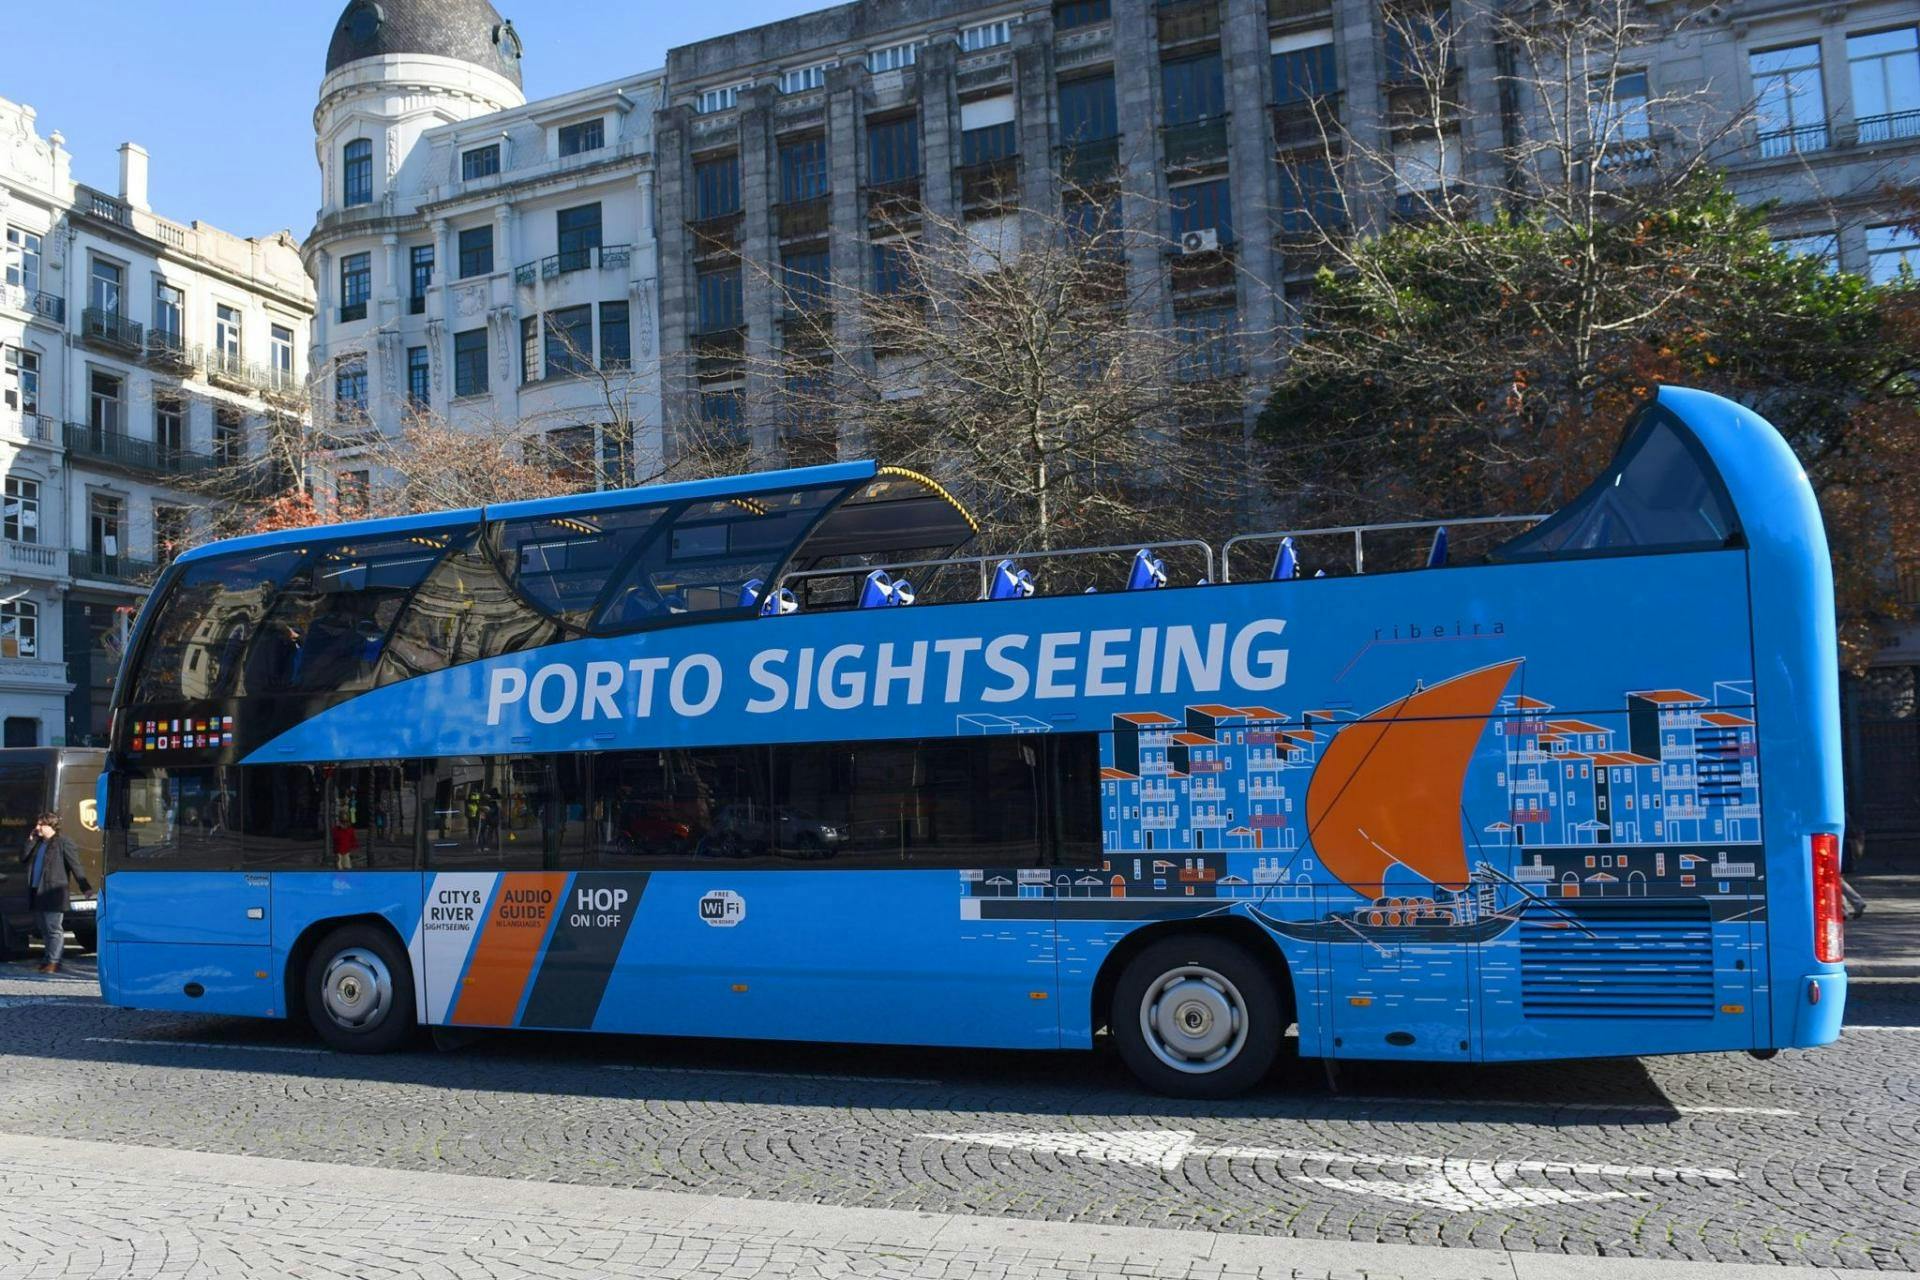 48 hours hop-on hop-off bus tour of Porto with wine cellars' visit